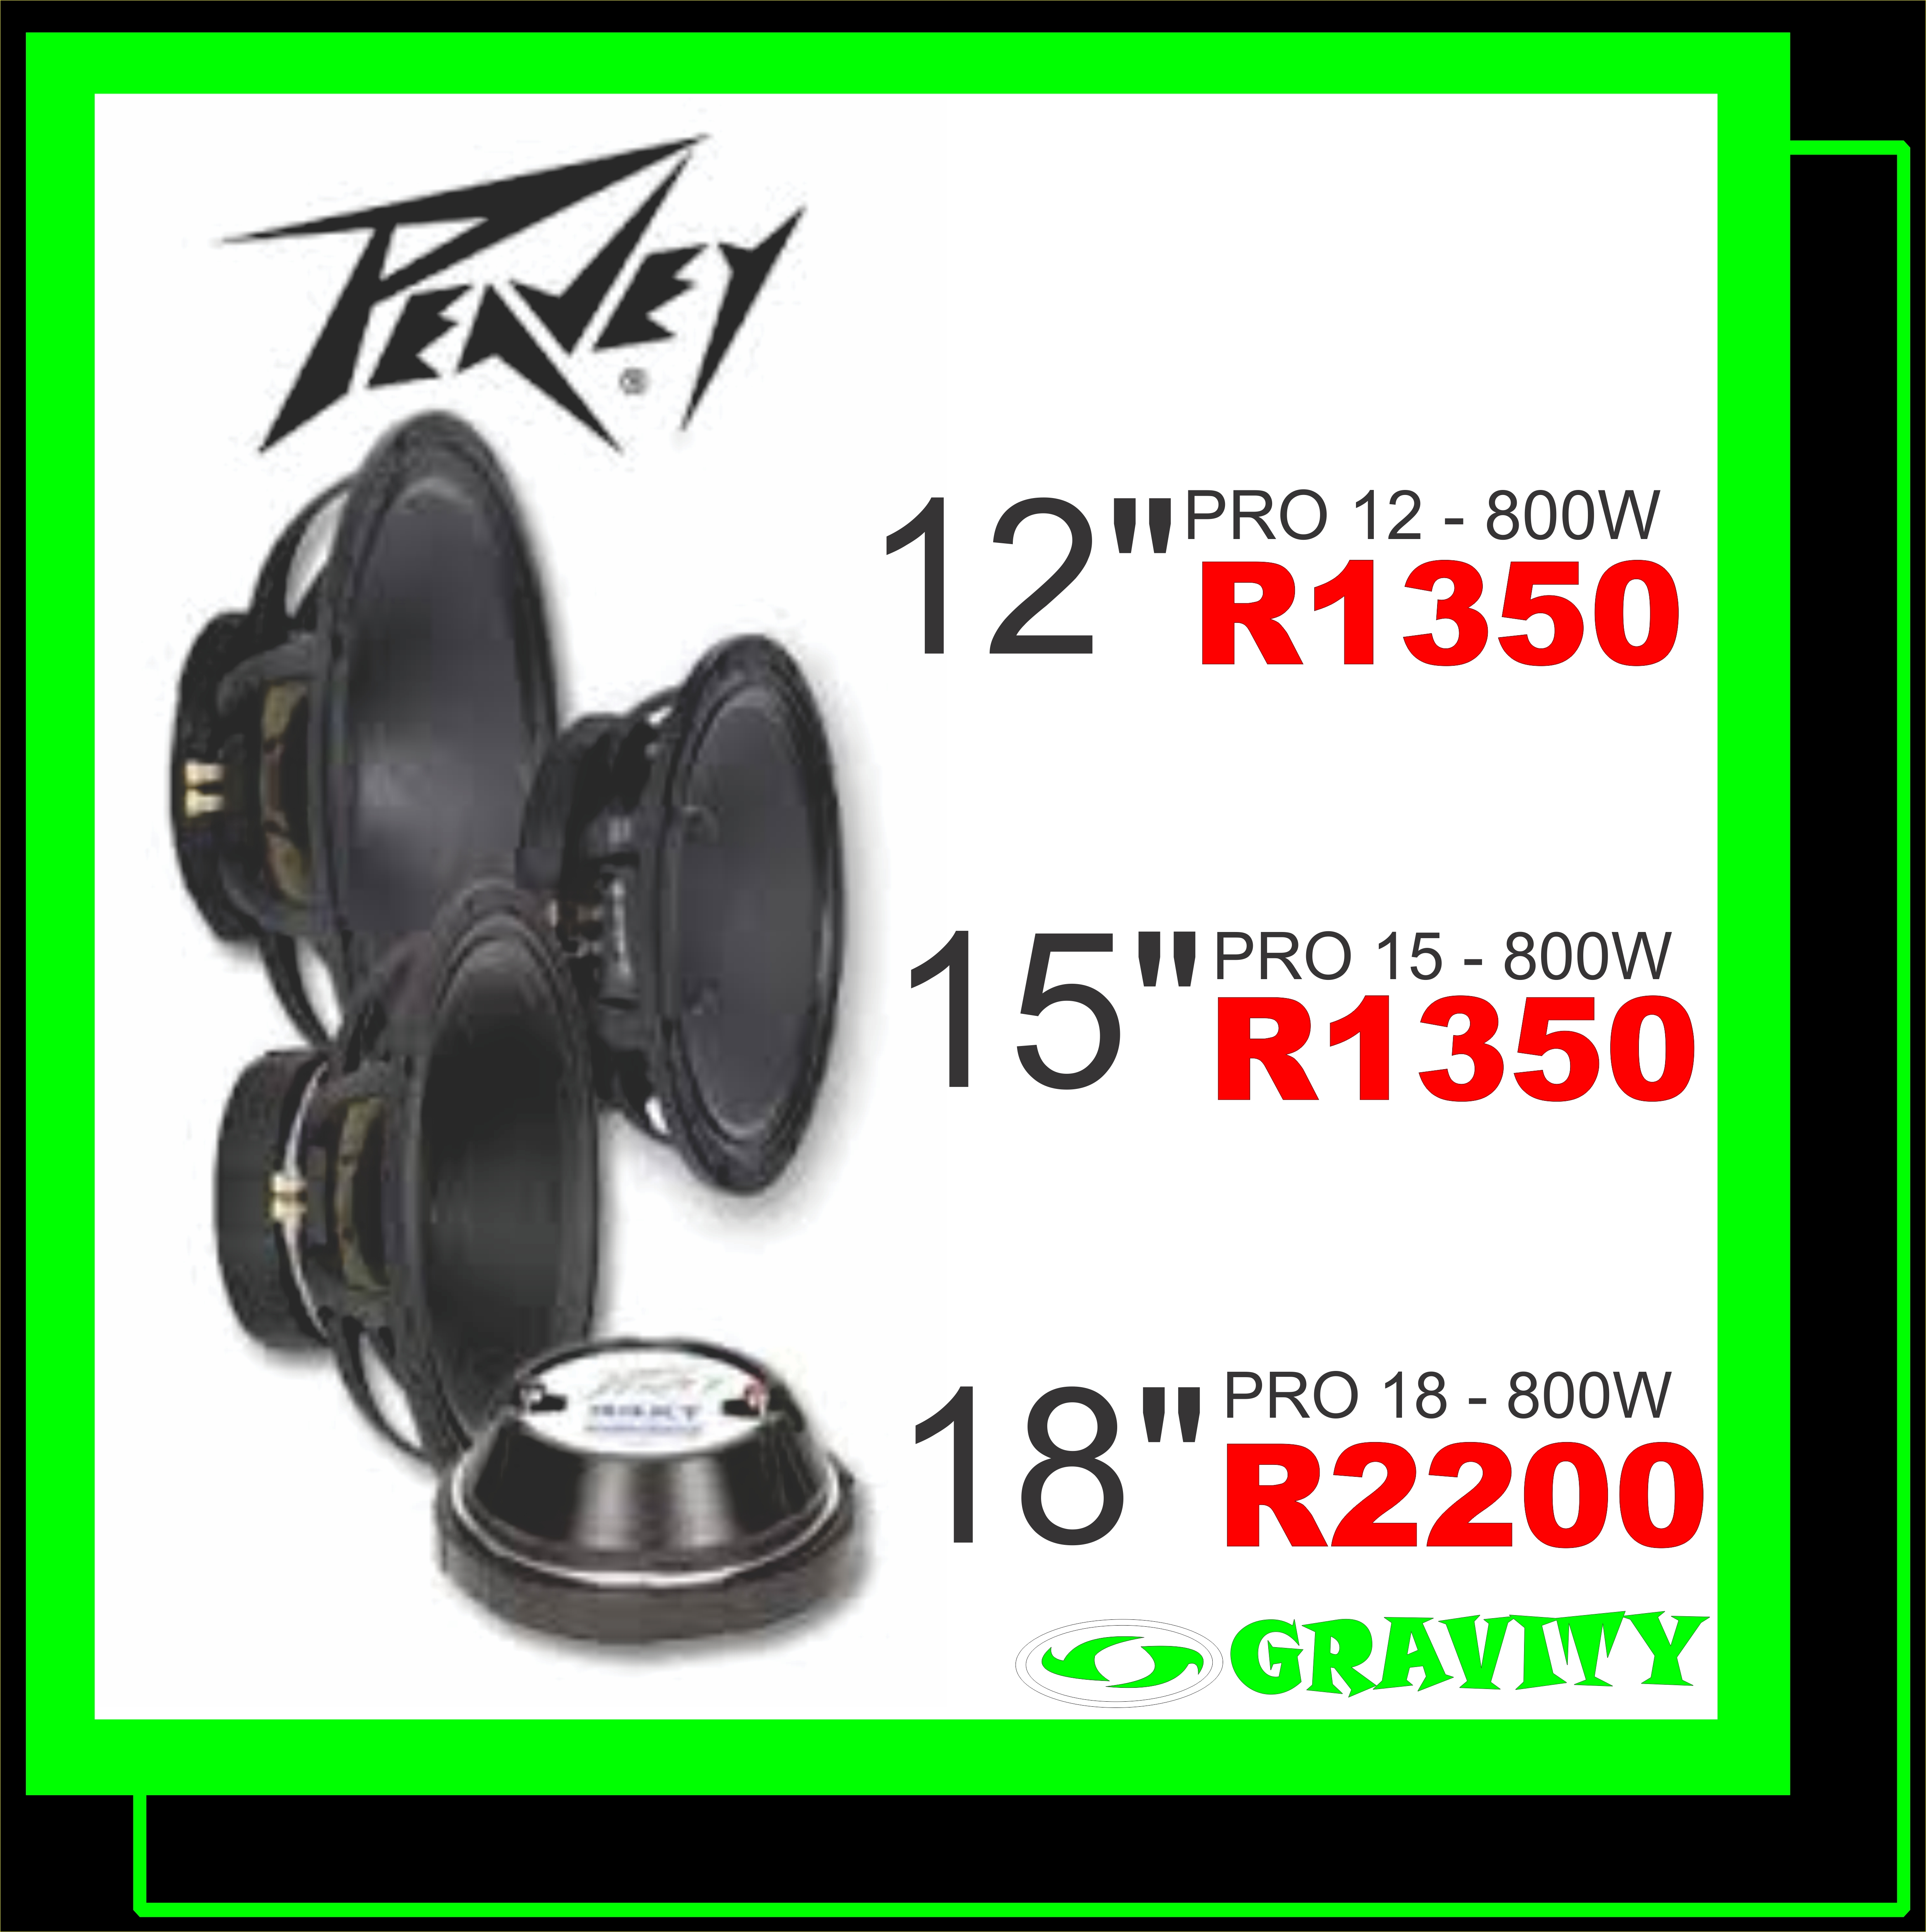 PEAVEY REPLACEMENT SPEAKERS PRO12 PRO 15 PRO 18 INCH PROFESSIONAL MIDS OR BASS REPLACEMENT SUB AT GRAVITY AUDIO SOUND AND LIGHTING WAREHOUSE 0315072736